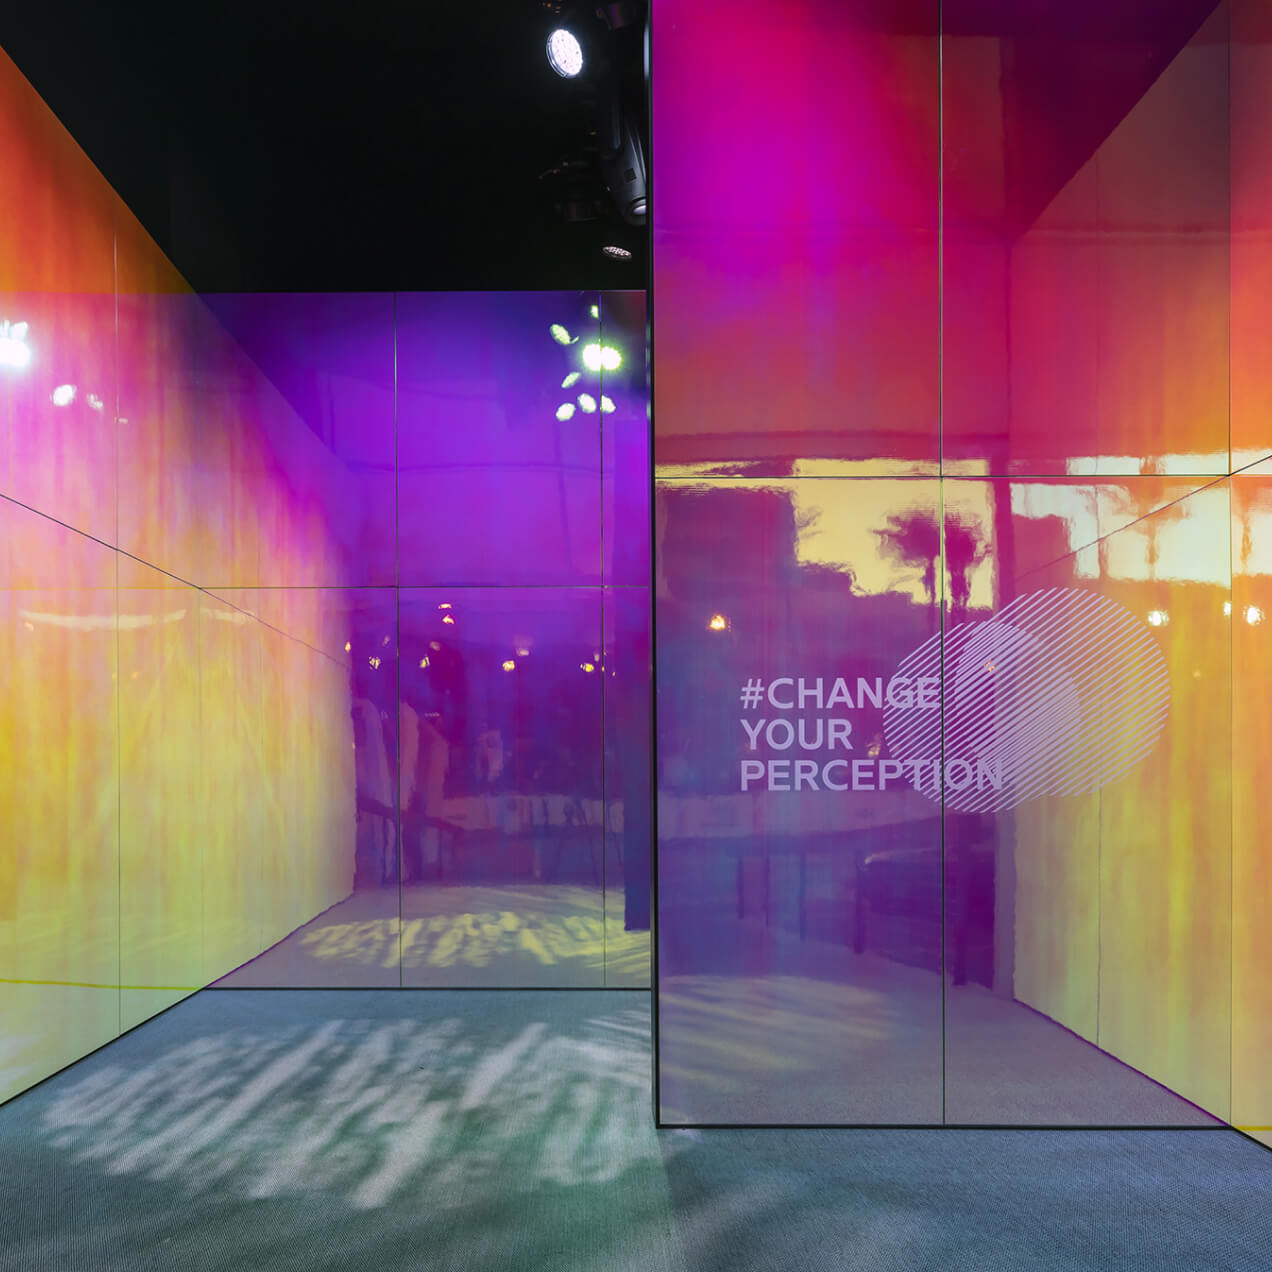 Colorful see-through Panels at CES Las Vegas, BMW #ChangeYourPerception